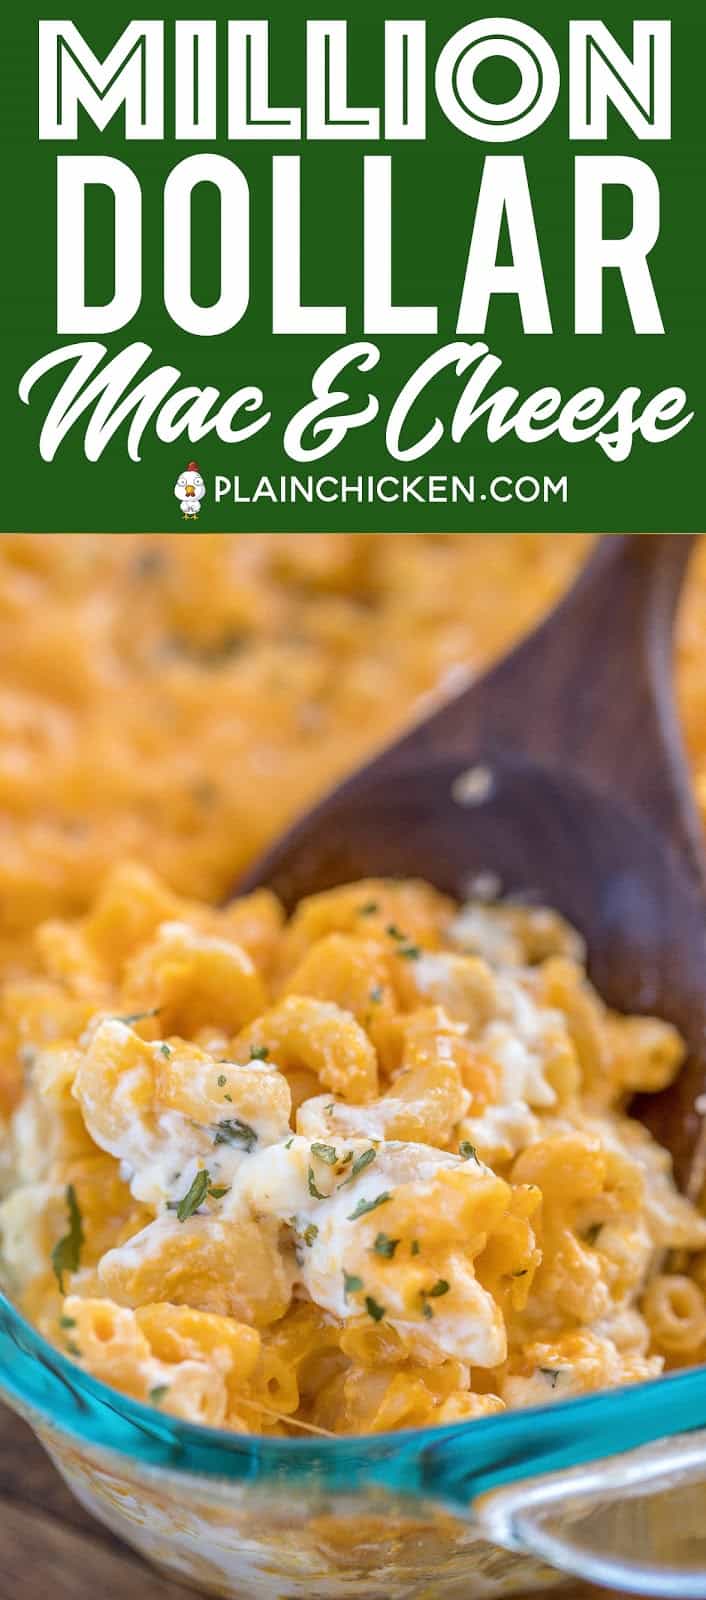 Million Dollar Mac & Cheese - the creamiest and dreamiest mac and cheese EVERRRR!!! This is the most requested mac and cheese in our house. Macaroni, cheese sauce, cottage cheese, sour cream, cream cheese, cheddar cheese. Great for potlucks and cookouts! Can make ahead and refrigerate for later. YUM! #macandcheese #casserole #cheese #pasta #sidedish